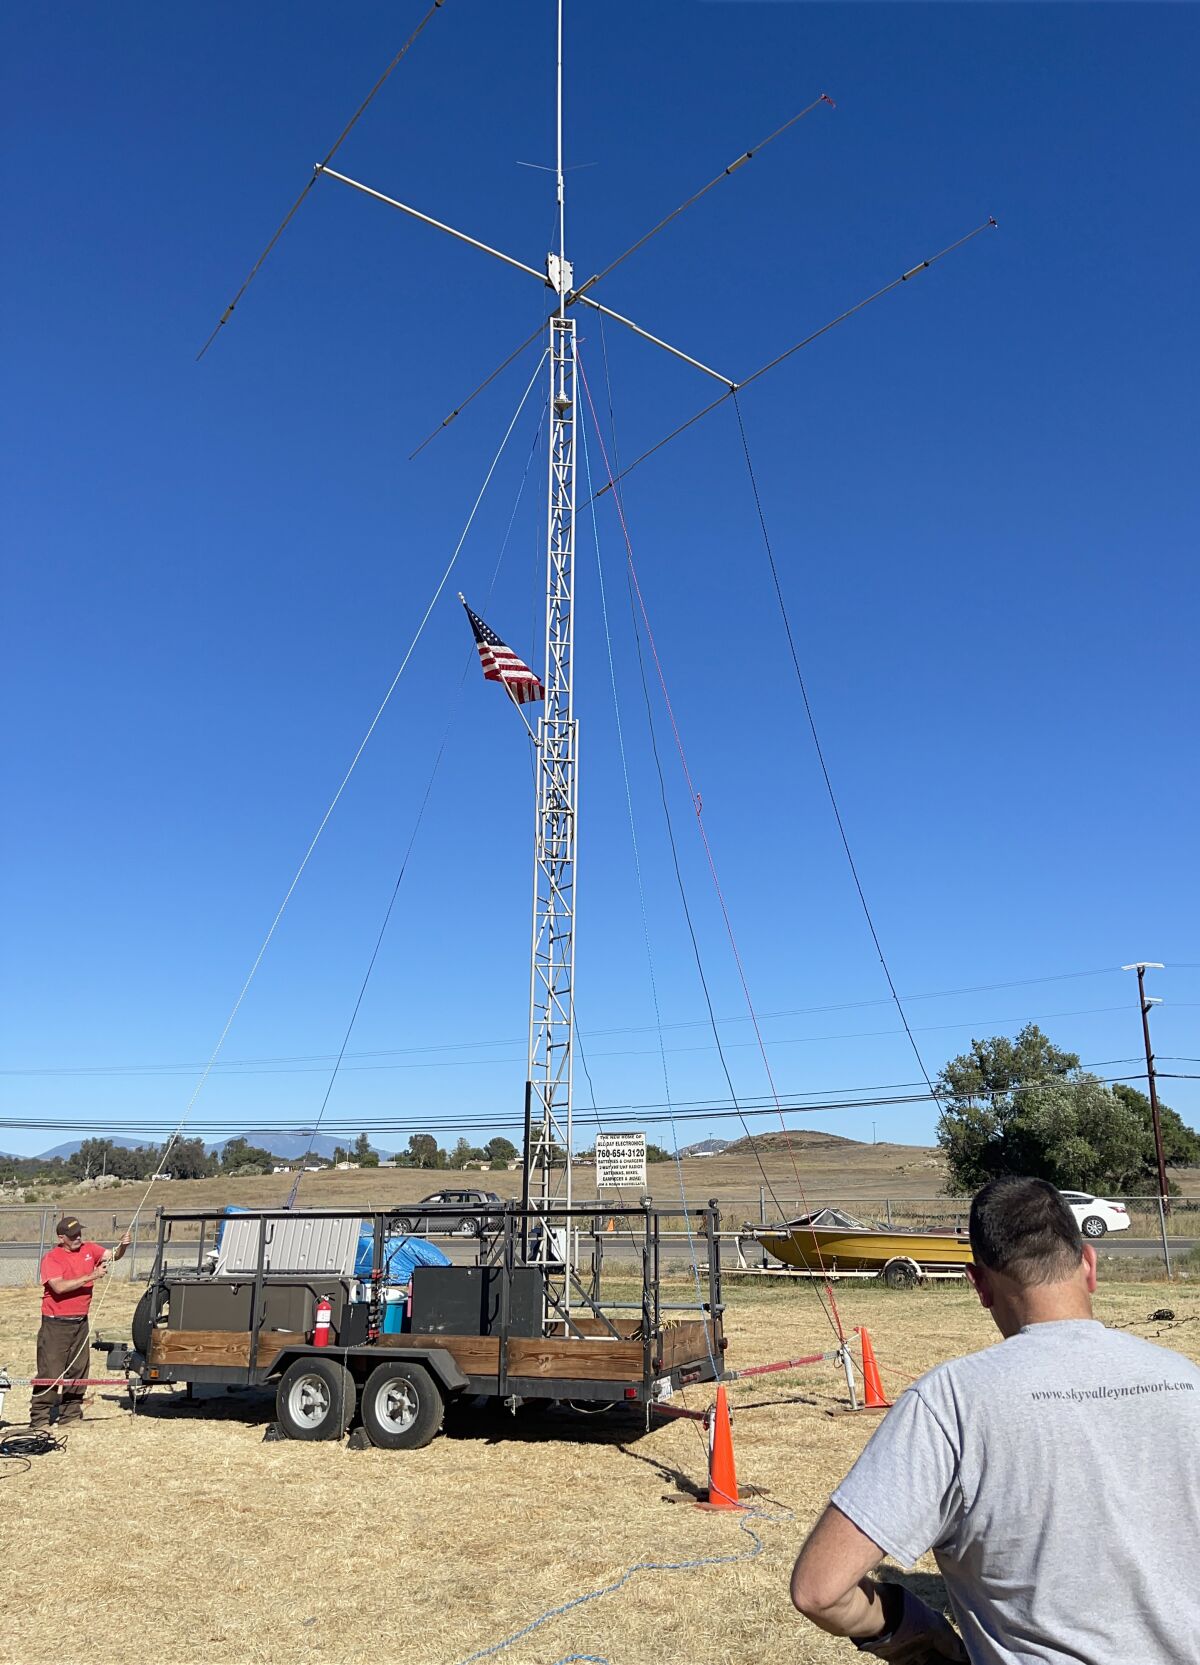 ROARS sets up a mobile communications trailer with an antenna at Amateur Radio Field Day.